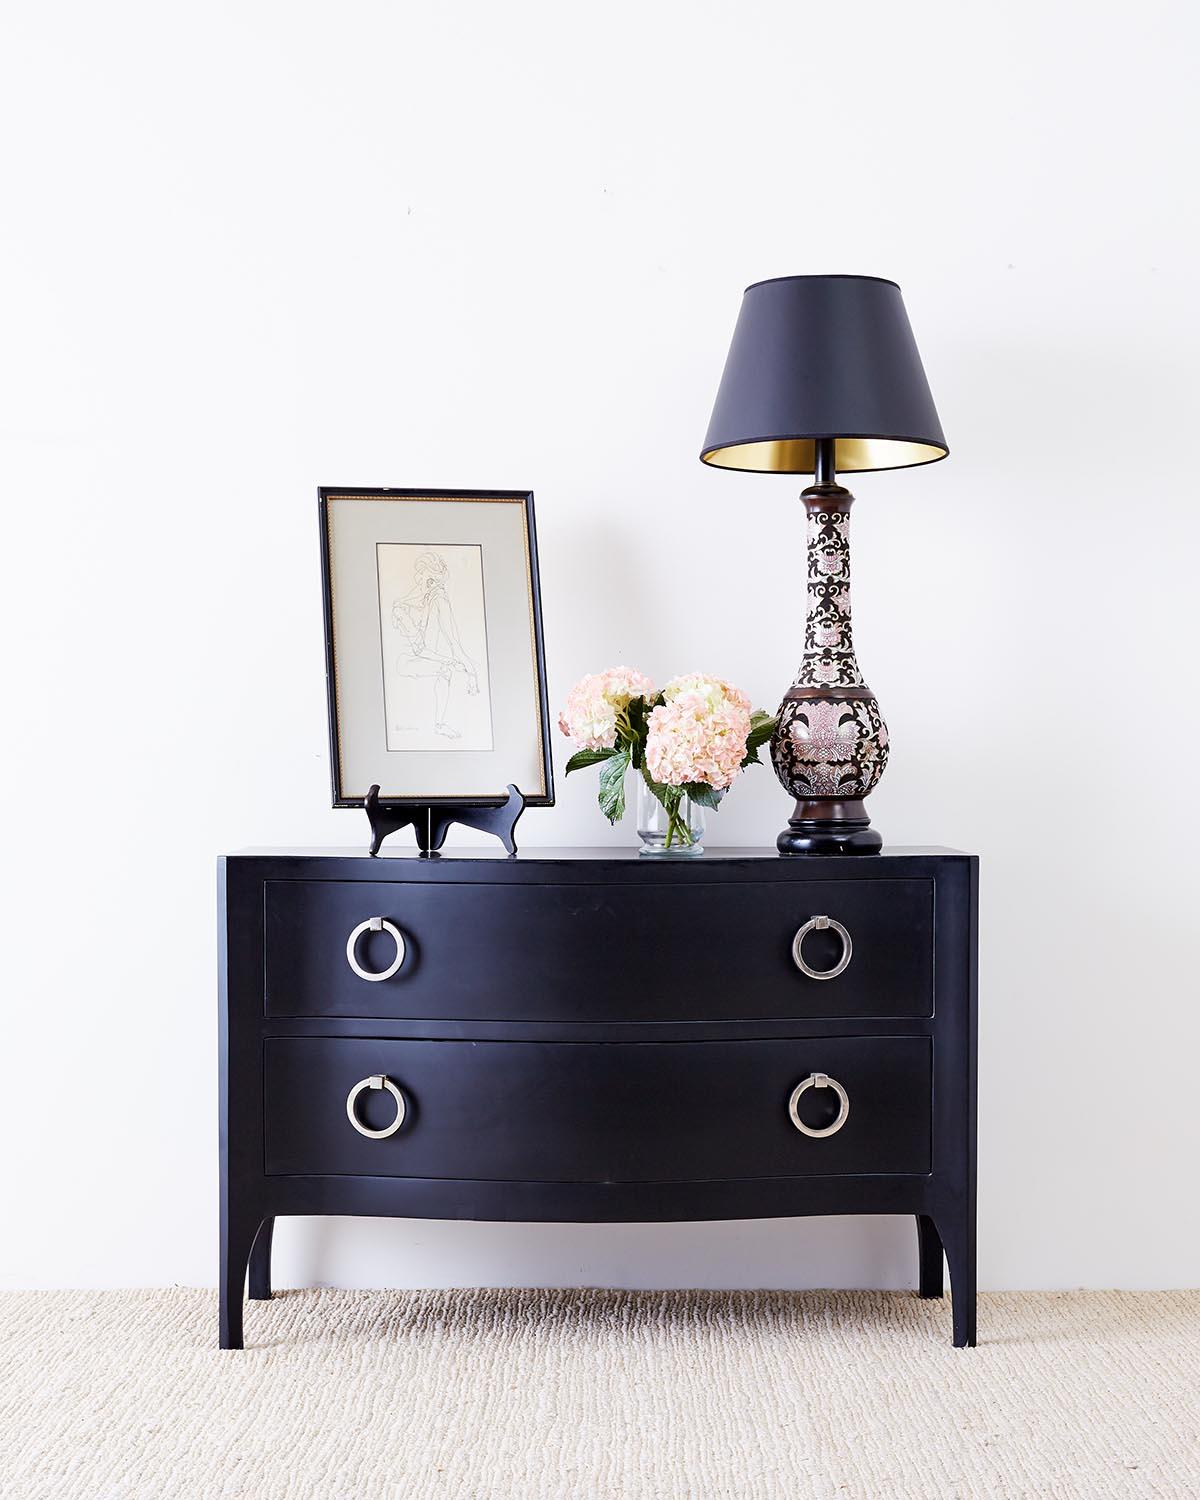 Stunning bow front chest of drawers or Trapu side table dresser by Scala Luxury. Features a lacquered matte black finish alternative to a their goatskin covered pieces. Rich mahogany interior drawers with large ring pulls made from nickel plated